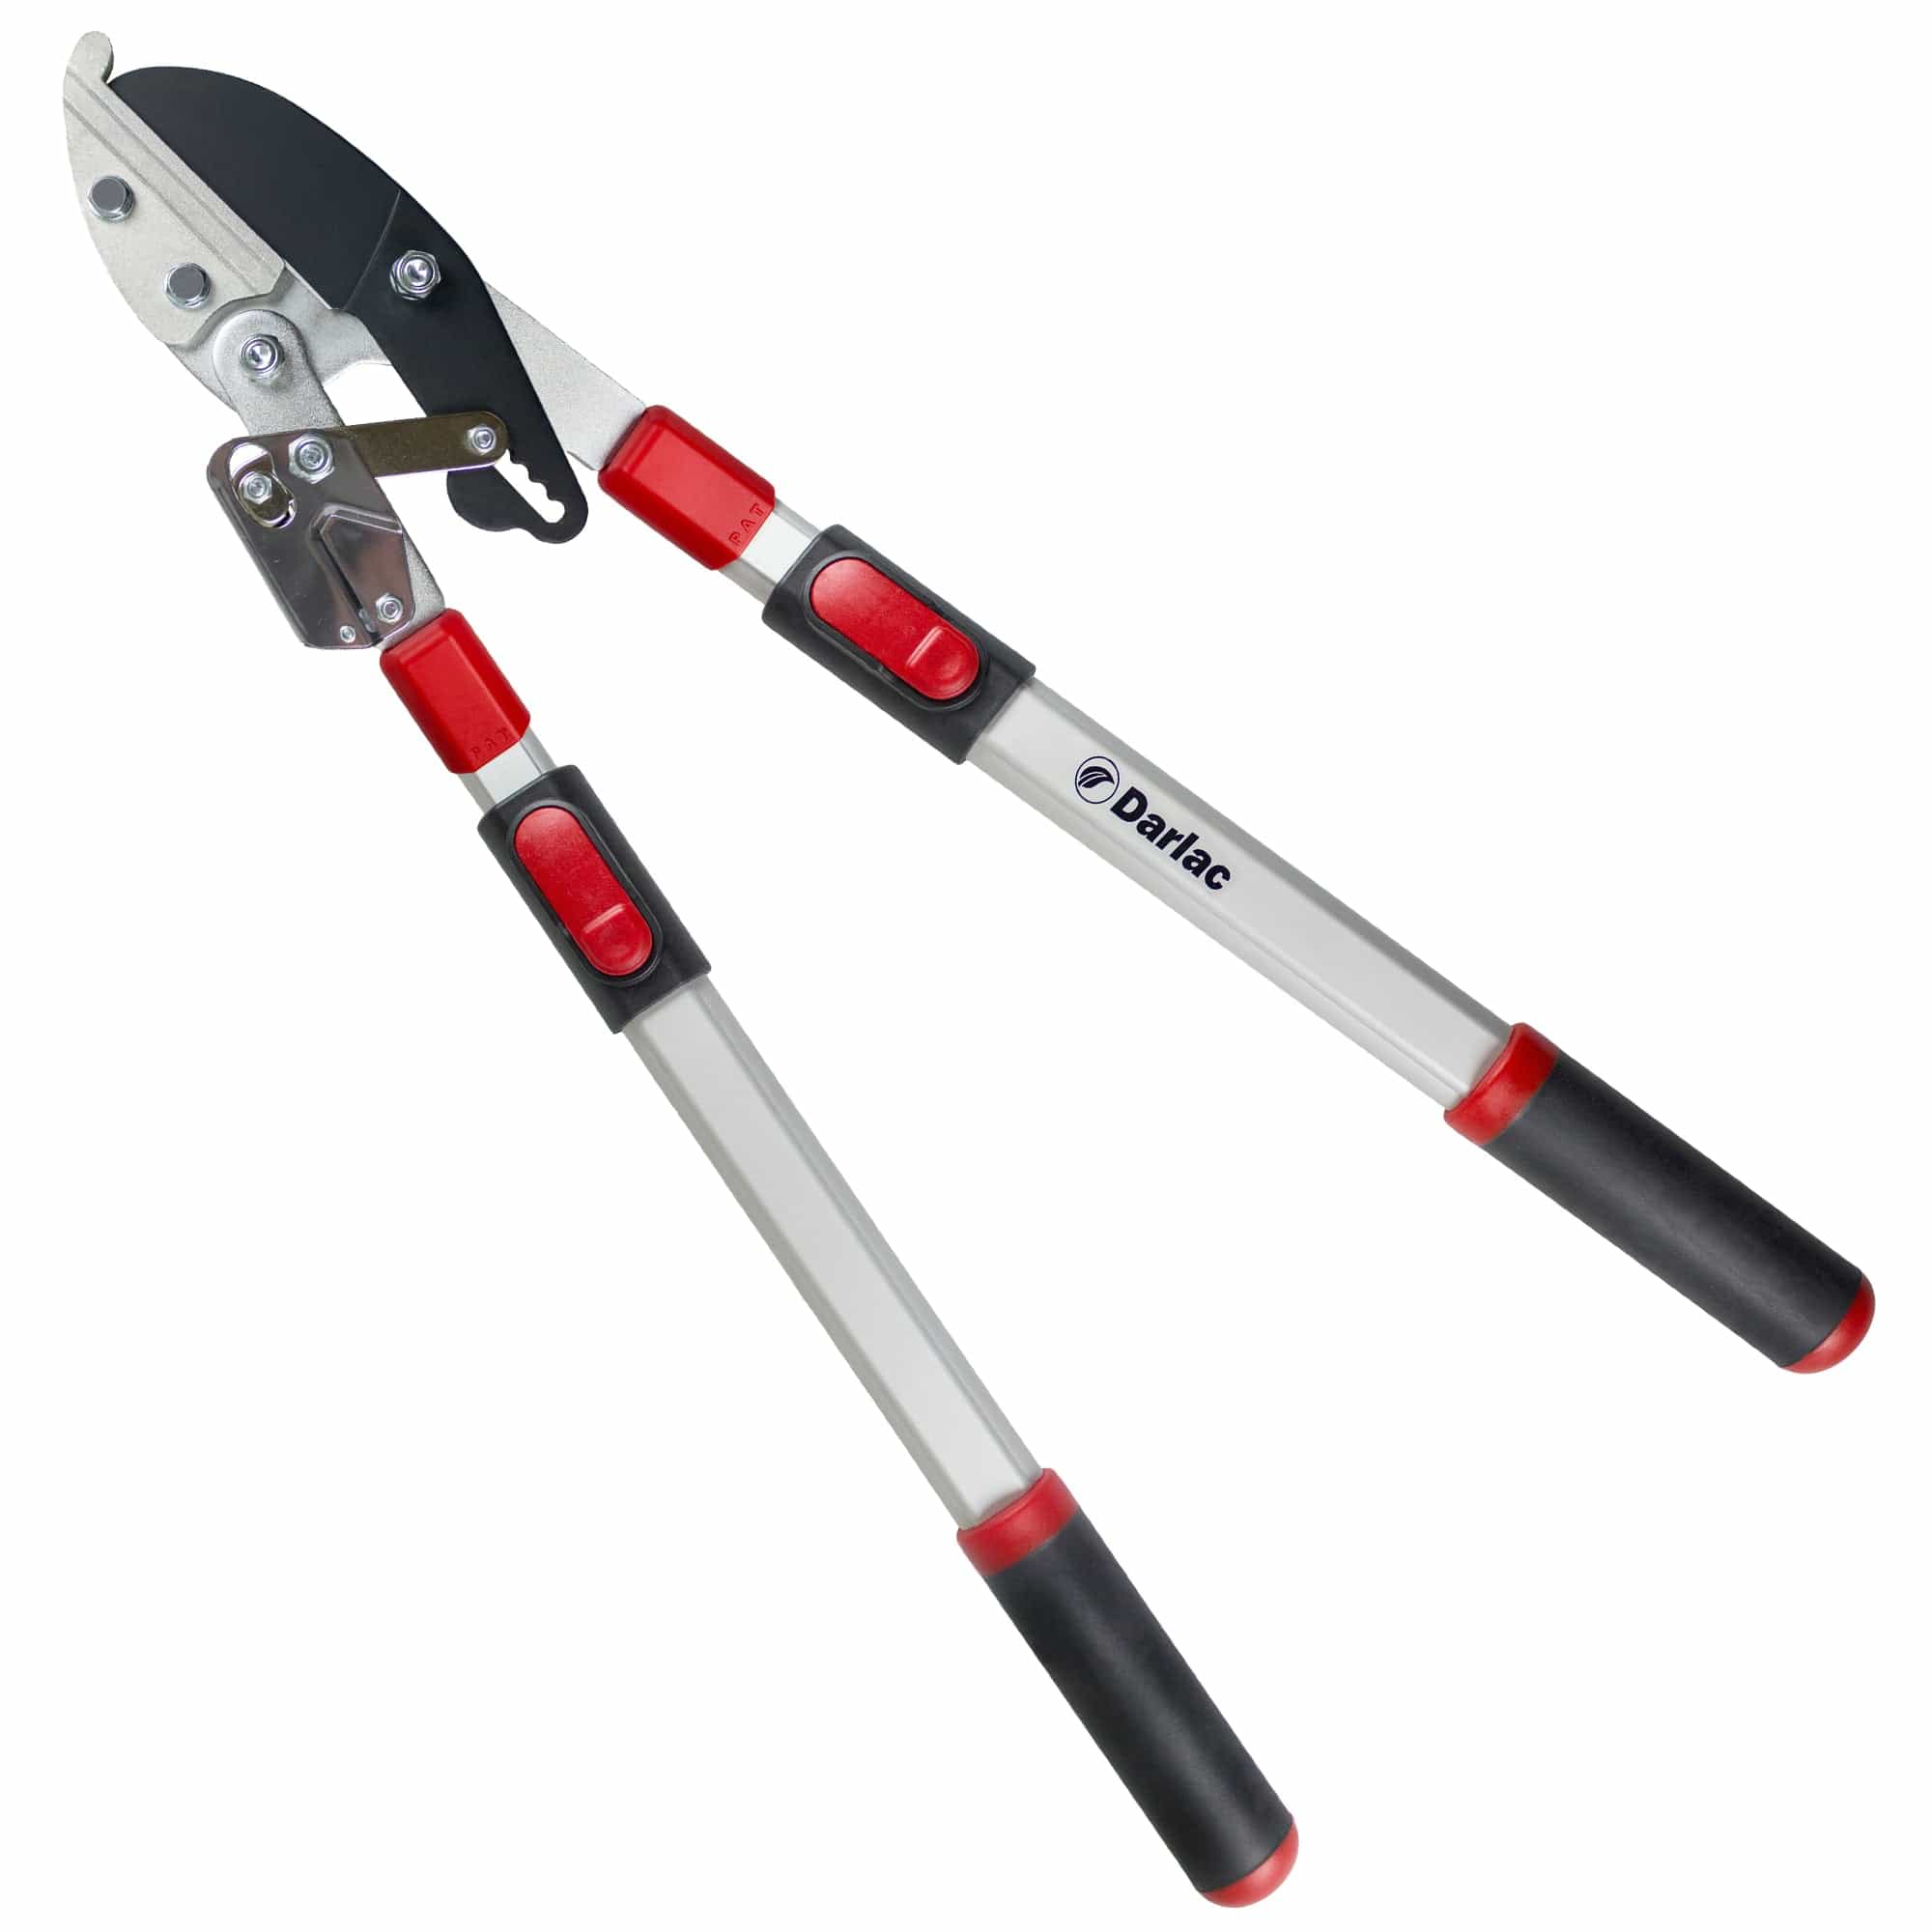 dt-brown HARDWARE Darlac Telescopic Ratchet Lopper